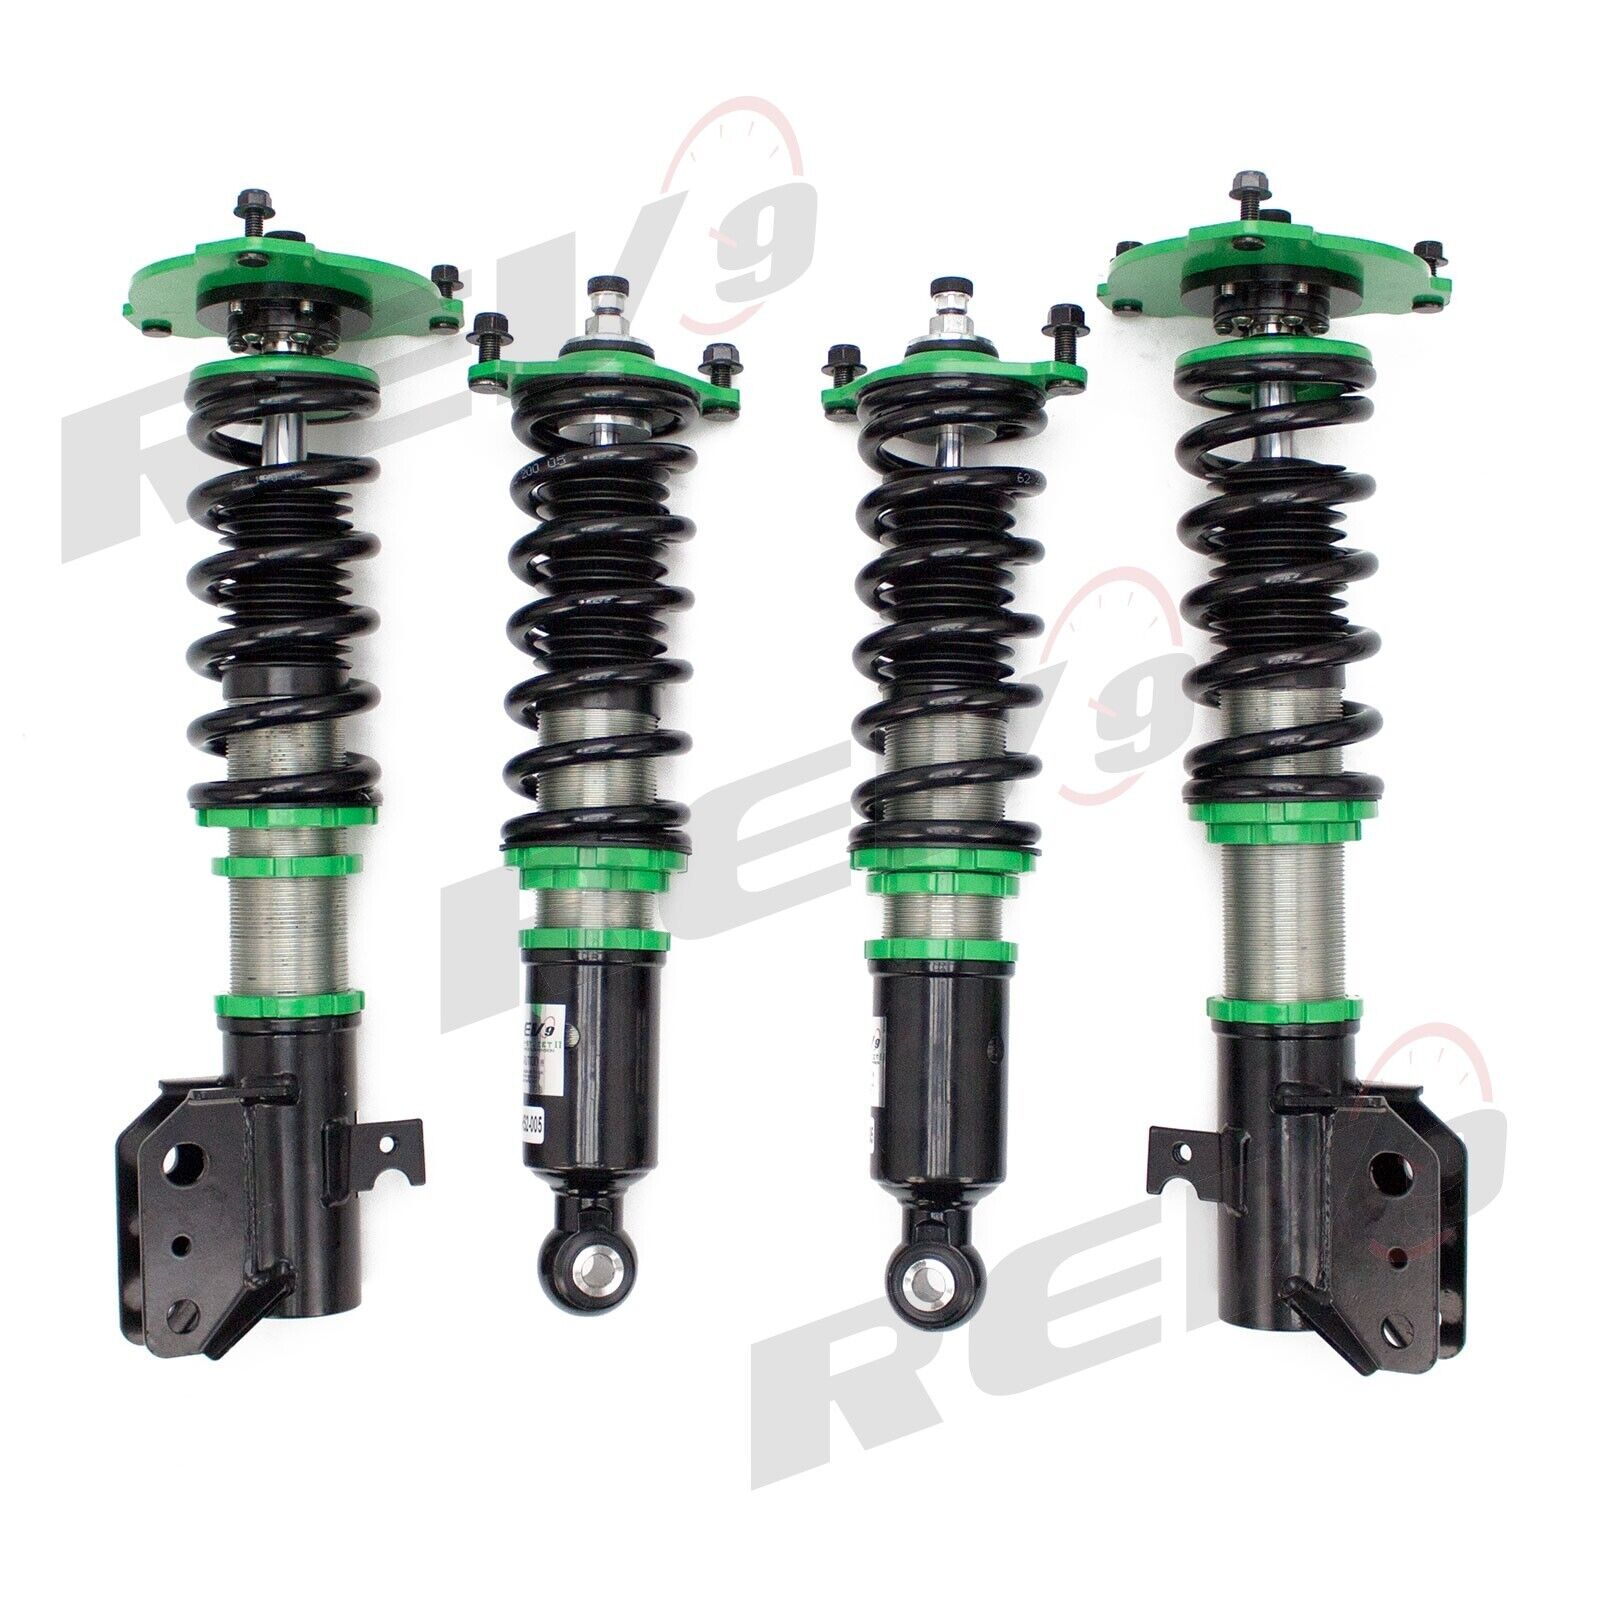 Coilovers For LEGACY 05-09 Suspension Kit Adjustable Damping Height